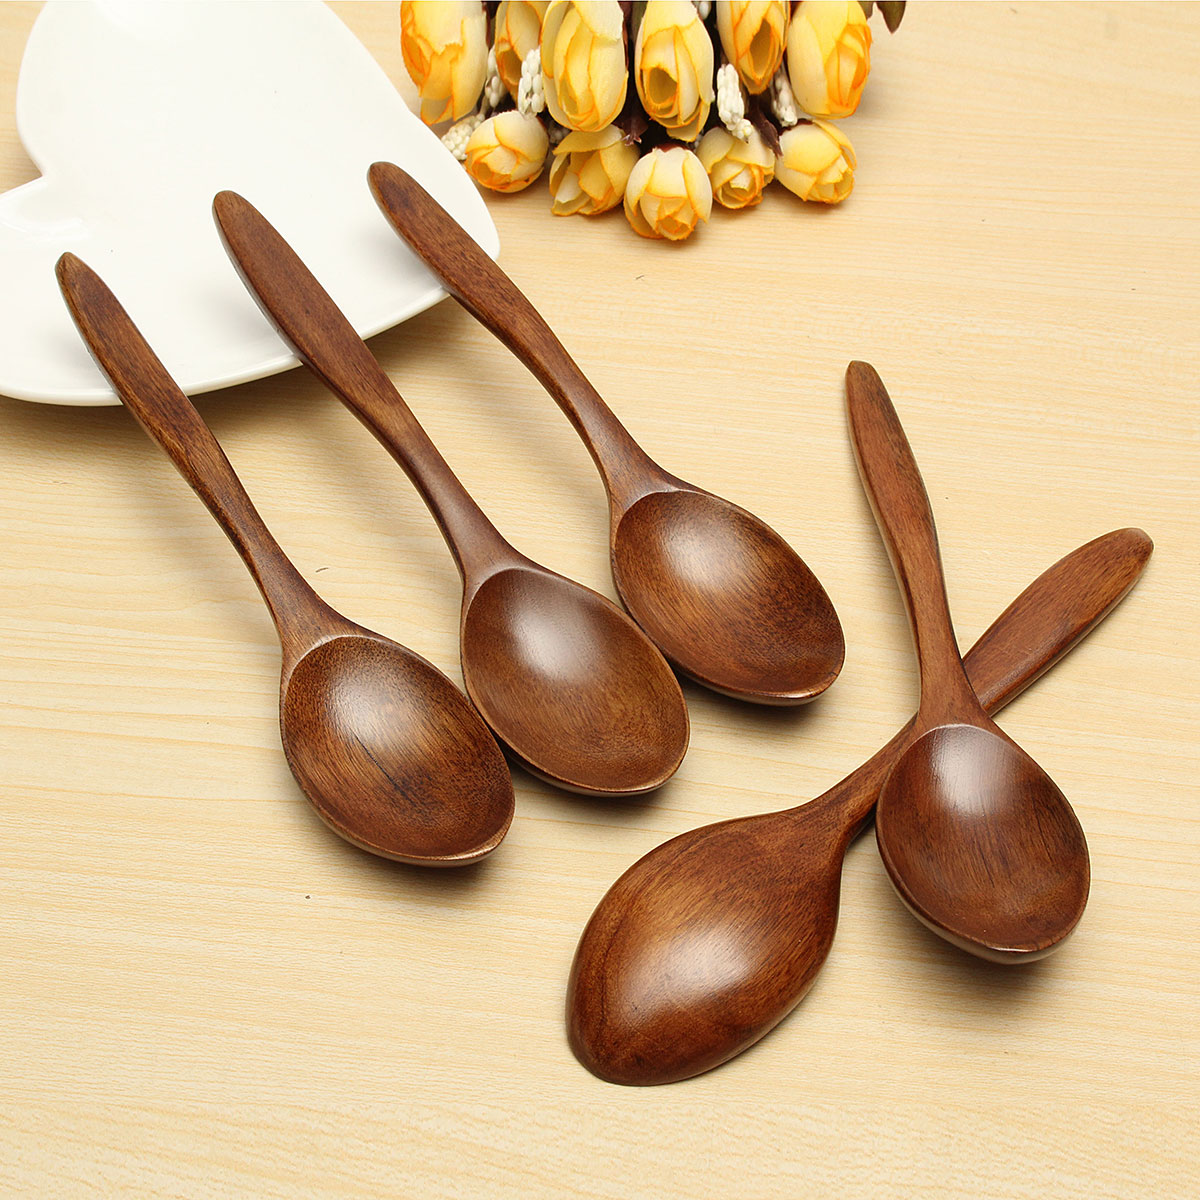 5Pcs-Wooden-Cooking-Kitchen-Utensil-Coffee-Tea-Ice-Cream-Soup-Caterin-Spoon-Tool-1067937-1